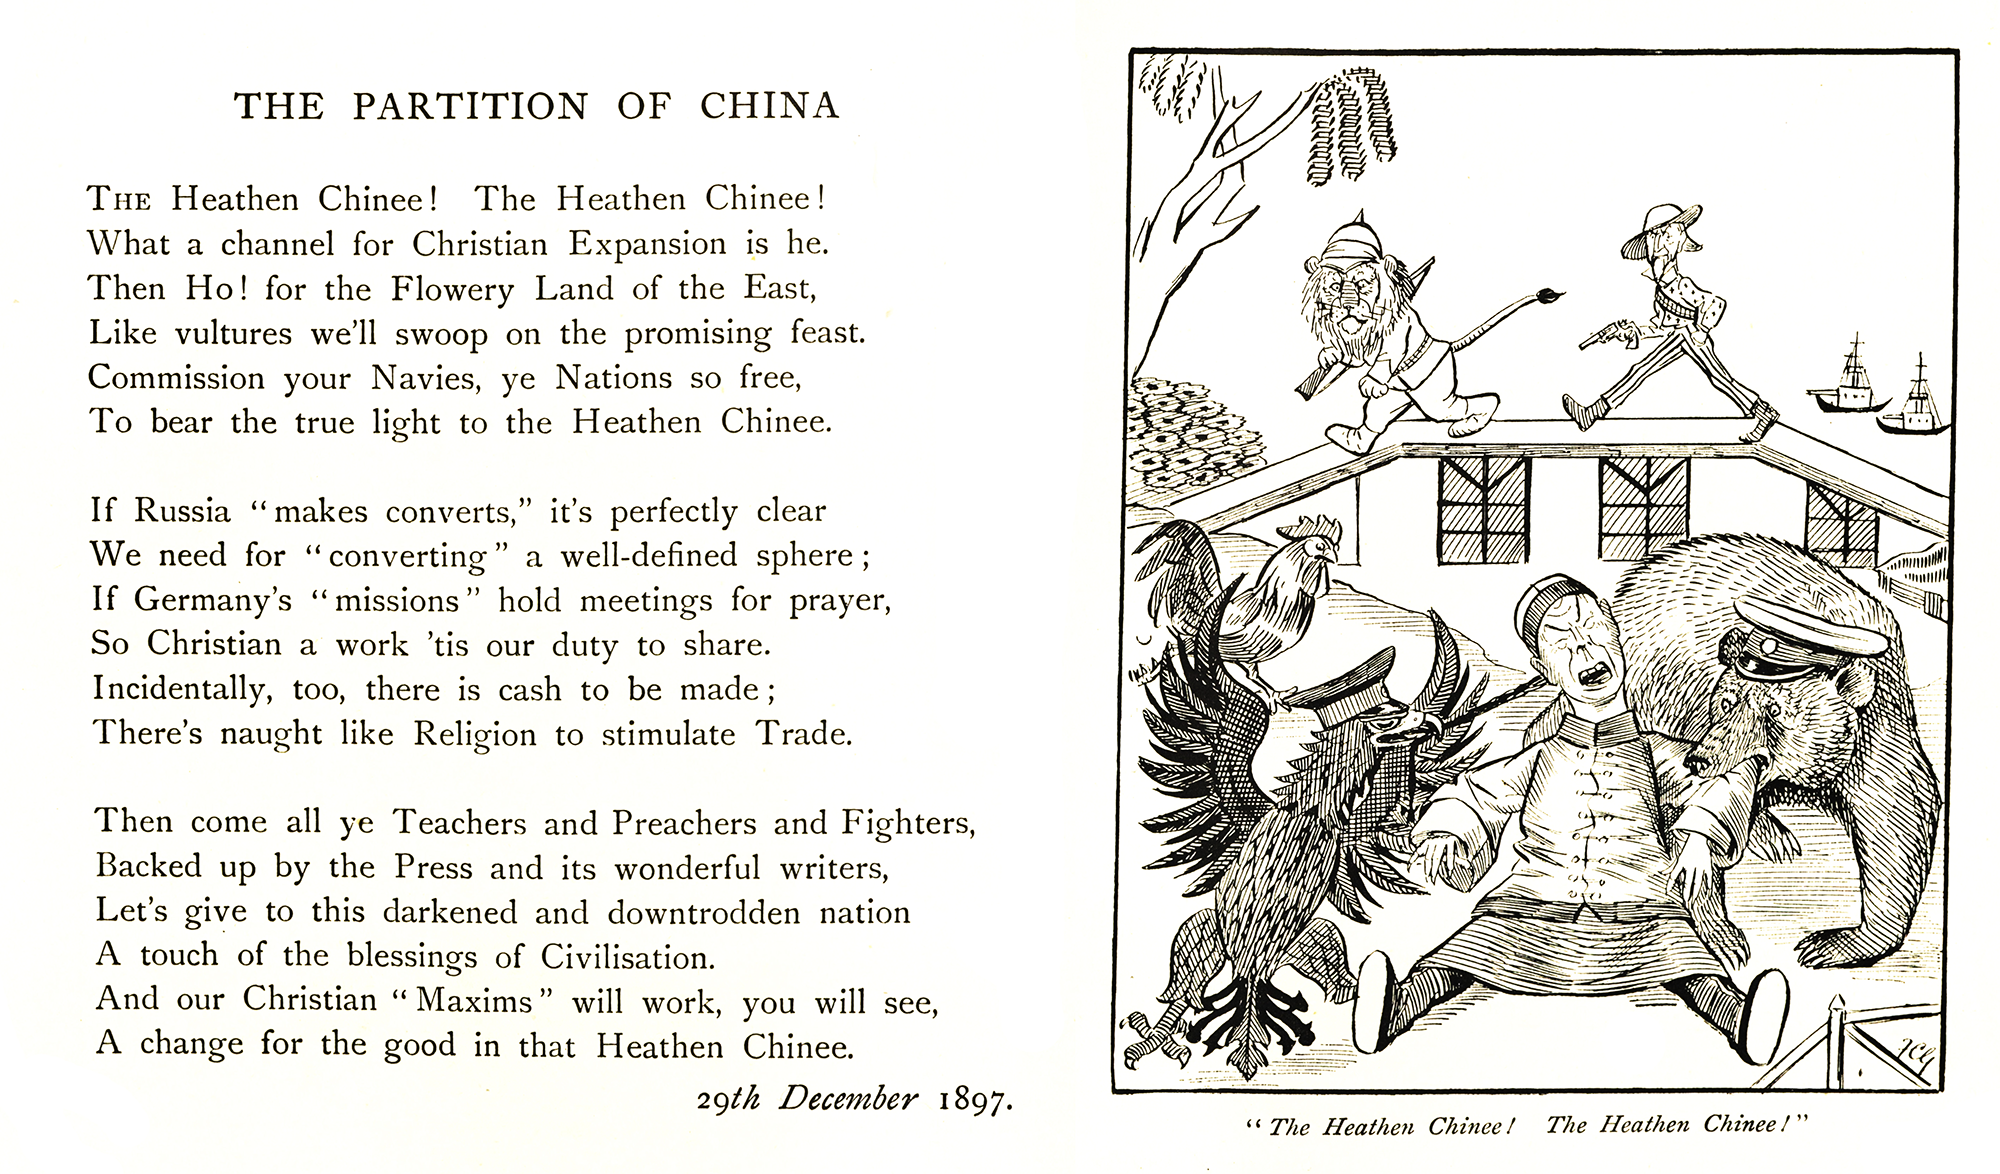 The Partition of China. British satirical poem by Sir Wilfrid Lawson